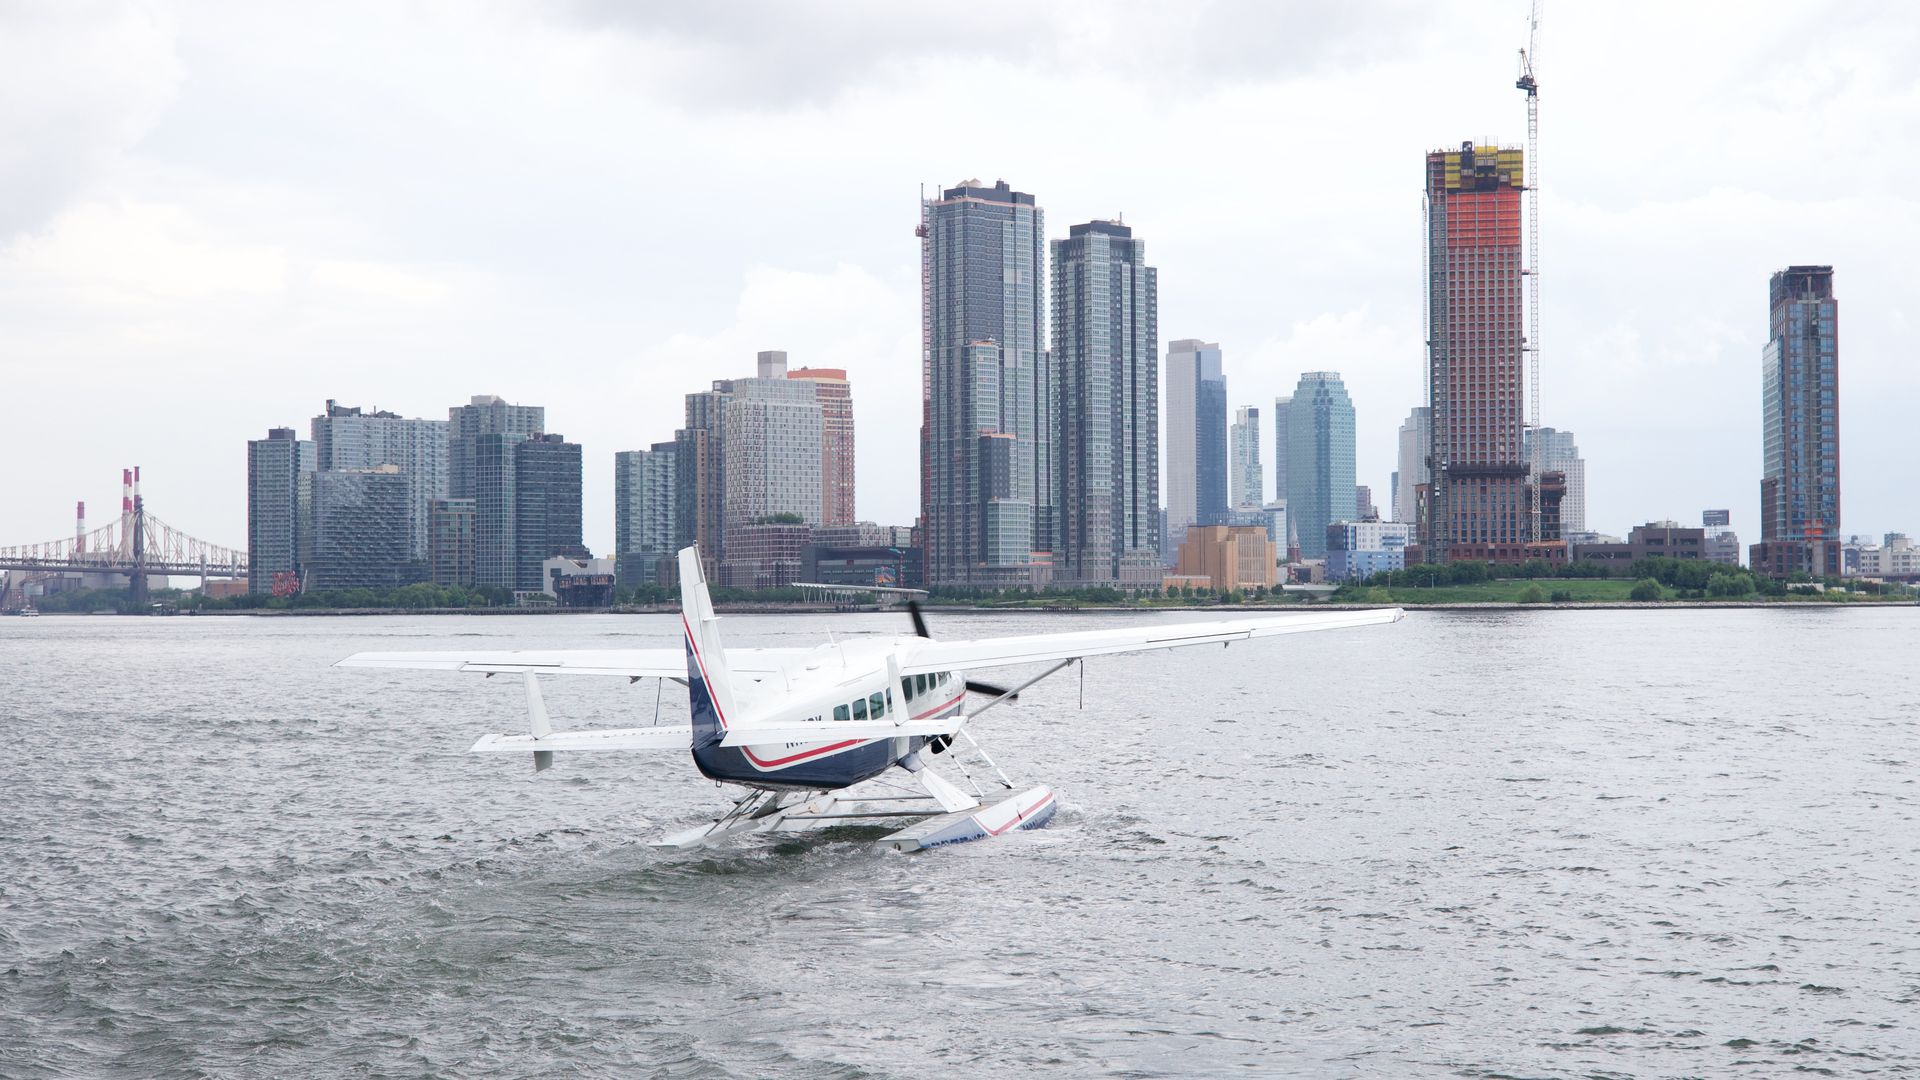 A Tailwind Air seaplane glides on river on August 4, 2021 in Manhattan, New York. 